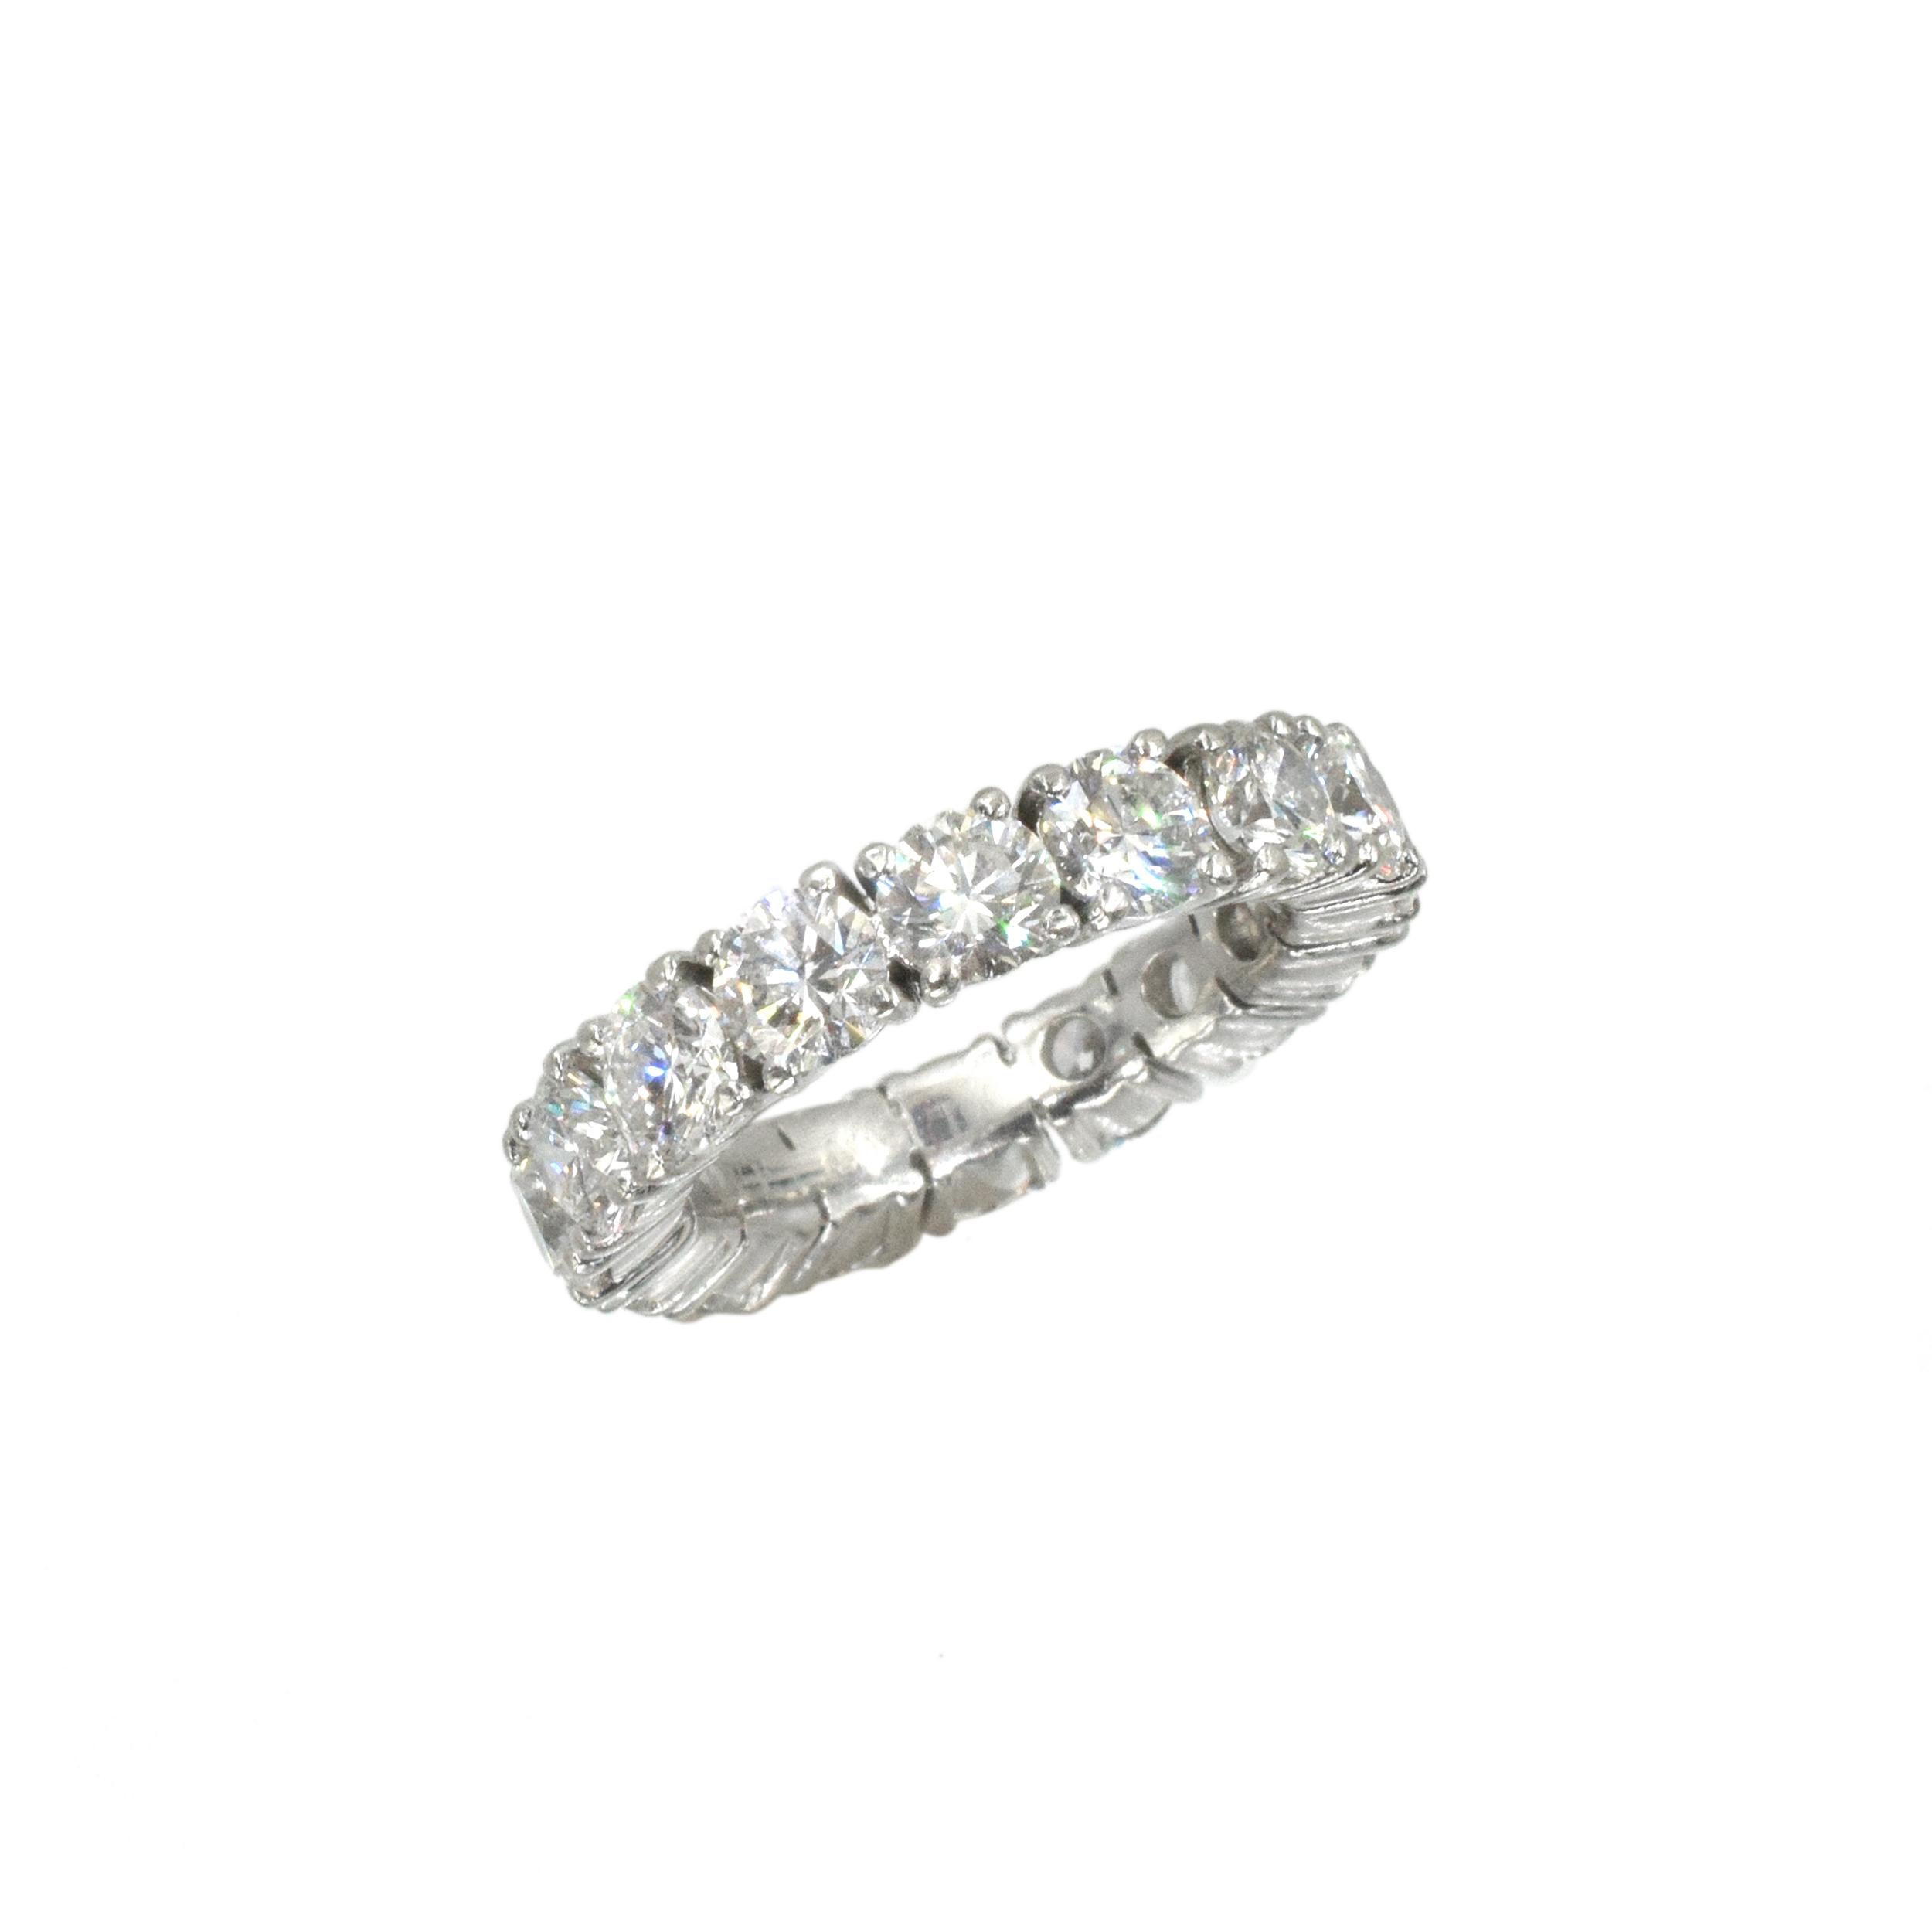 Graff Diamond and Platinum Eternity Wedding Band This eternity wedding band has 16 round brilliant cut diamonds (Color: F/G, Clarity: VS+) weighing a total of 4.89 carats all in 4 prong platinum setting. Finger Size: 5.75
.Comes with a copy of the